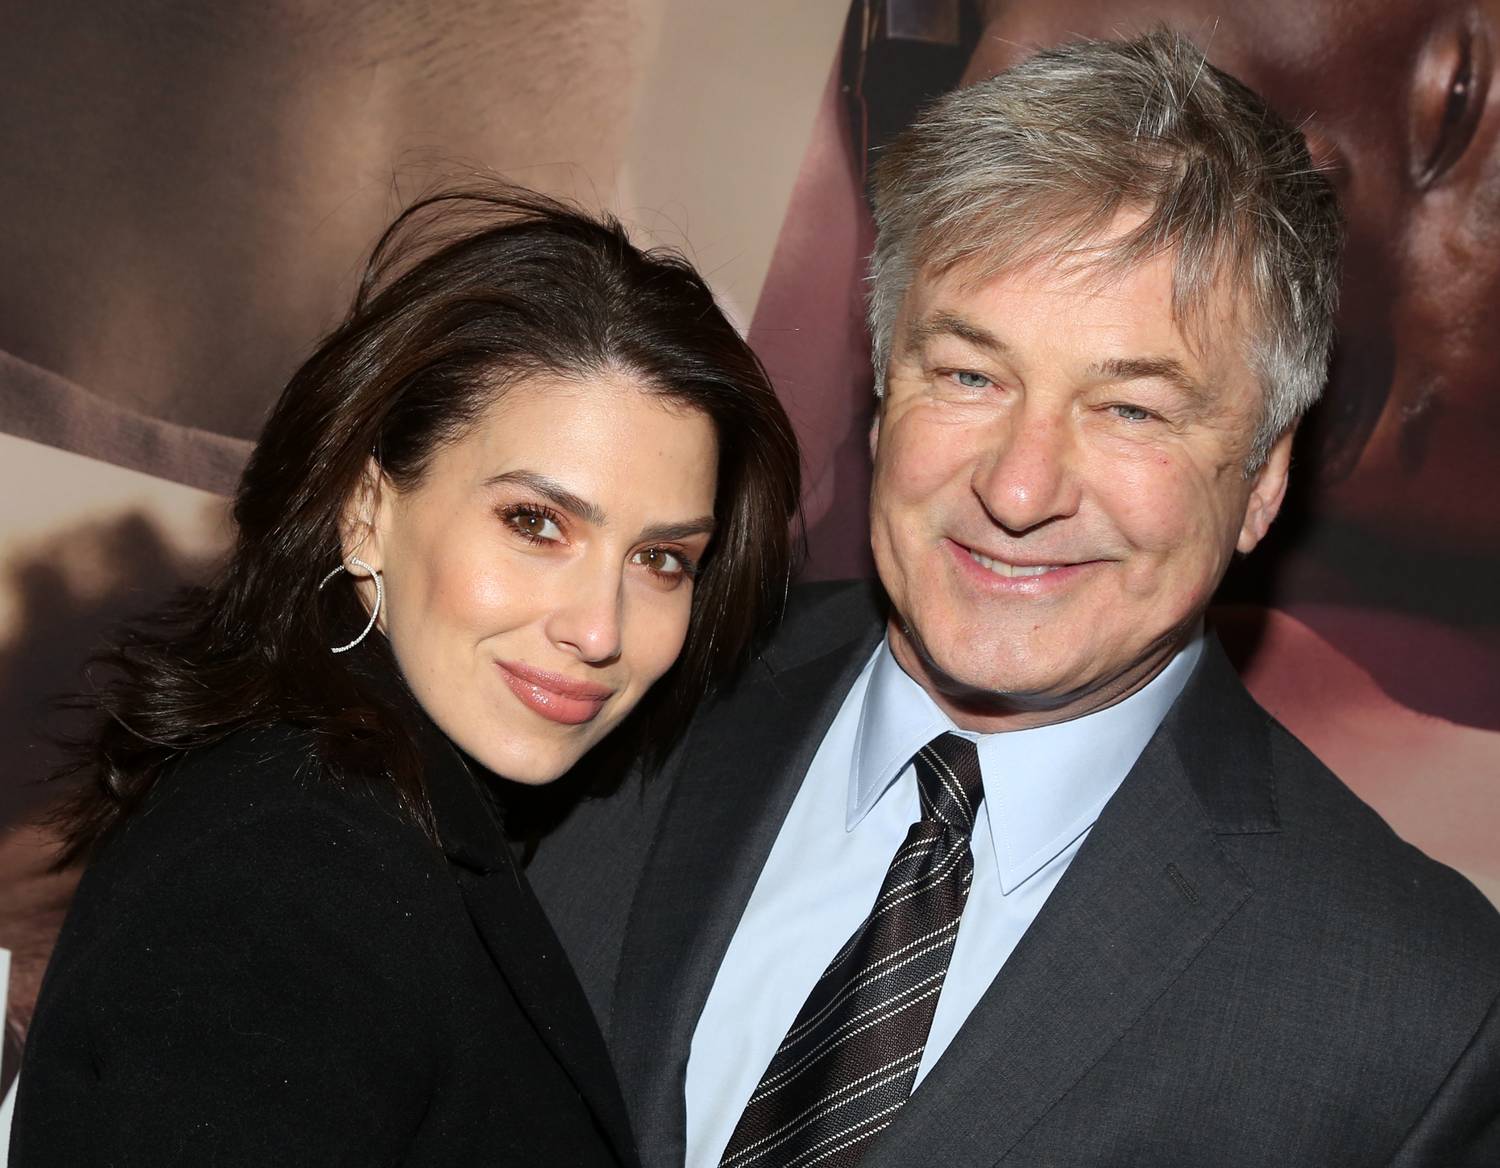 Velvet - Gum Sugar - Alec Baldwin's wife pretended to be Spanish, even though she is American